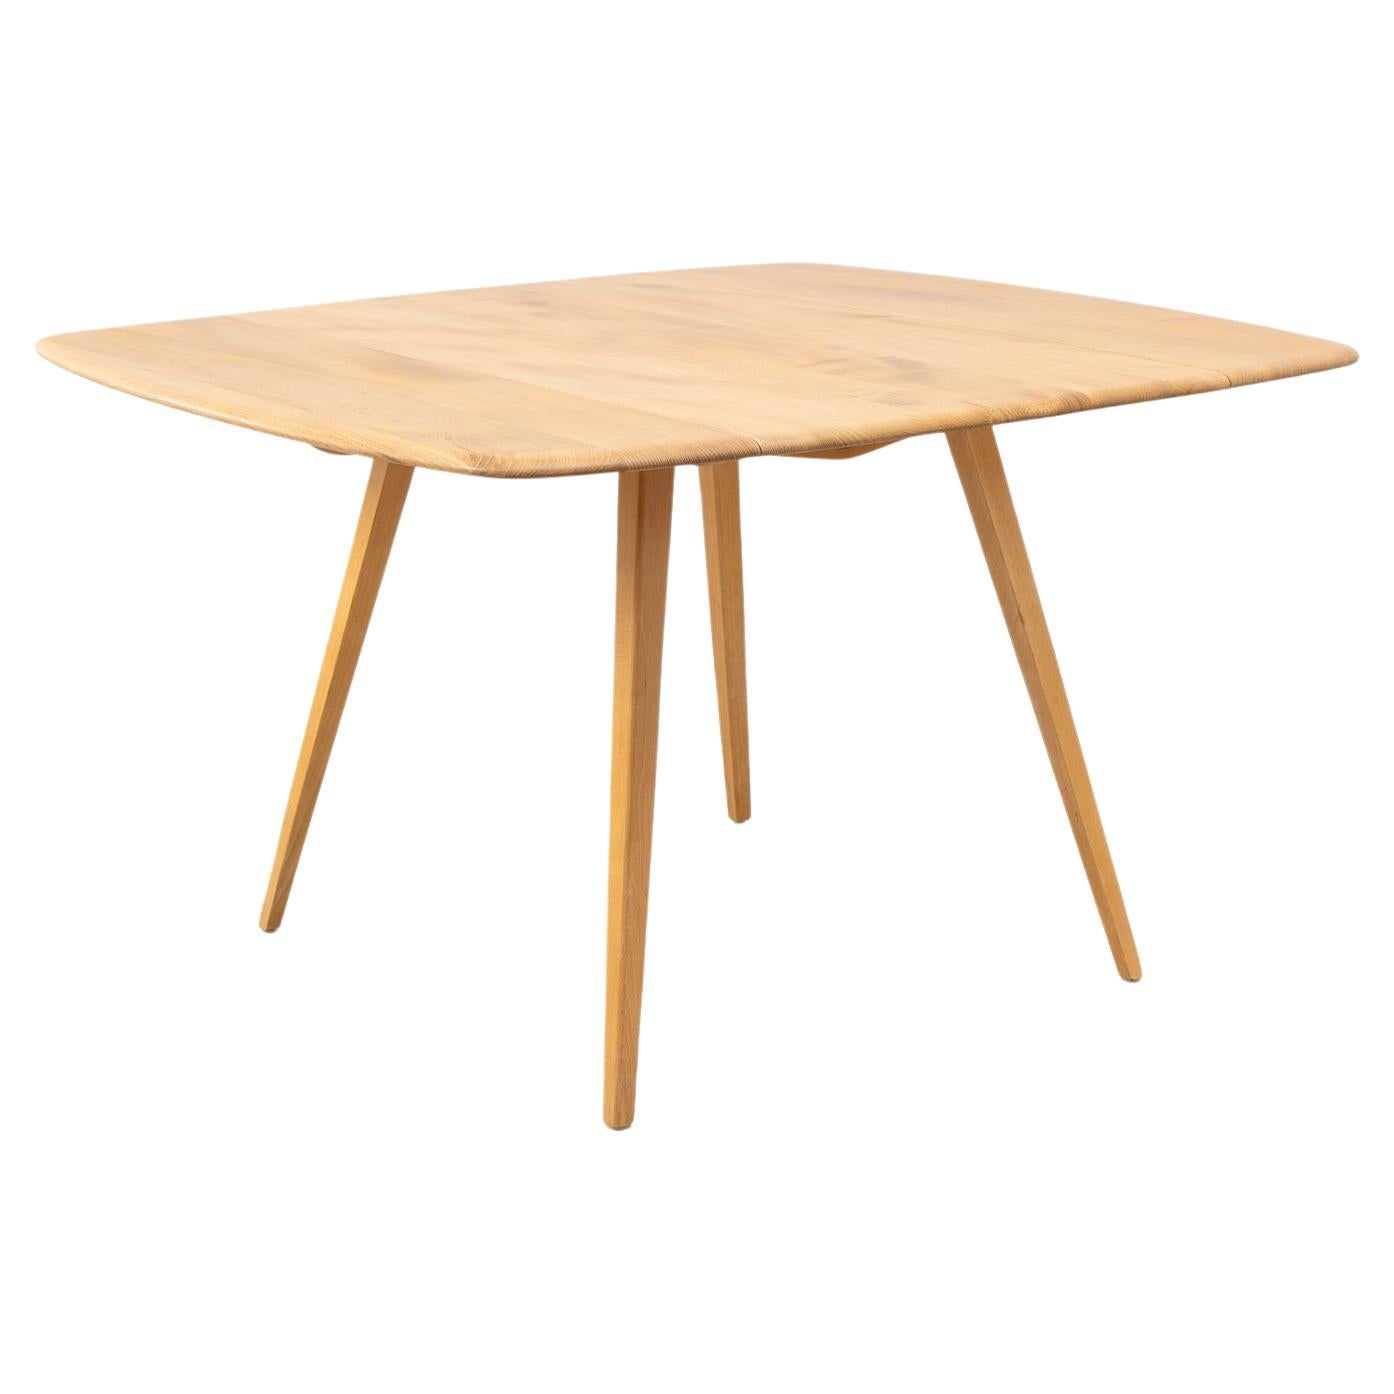 Foldable Dining Table made of Beech and Elm from Ercol, circa 1960, UK